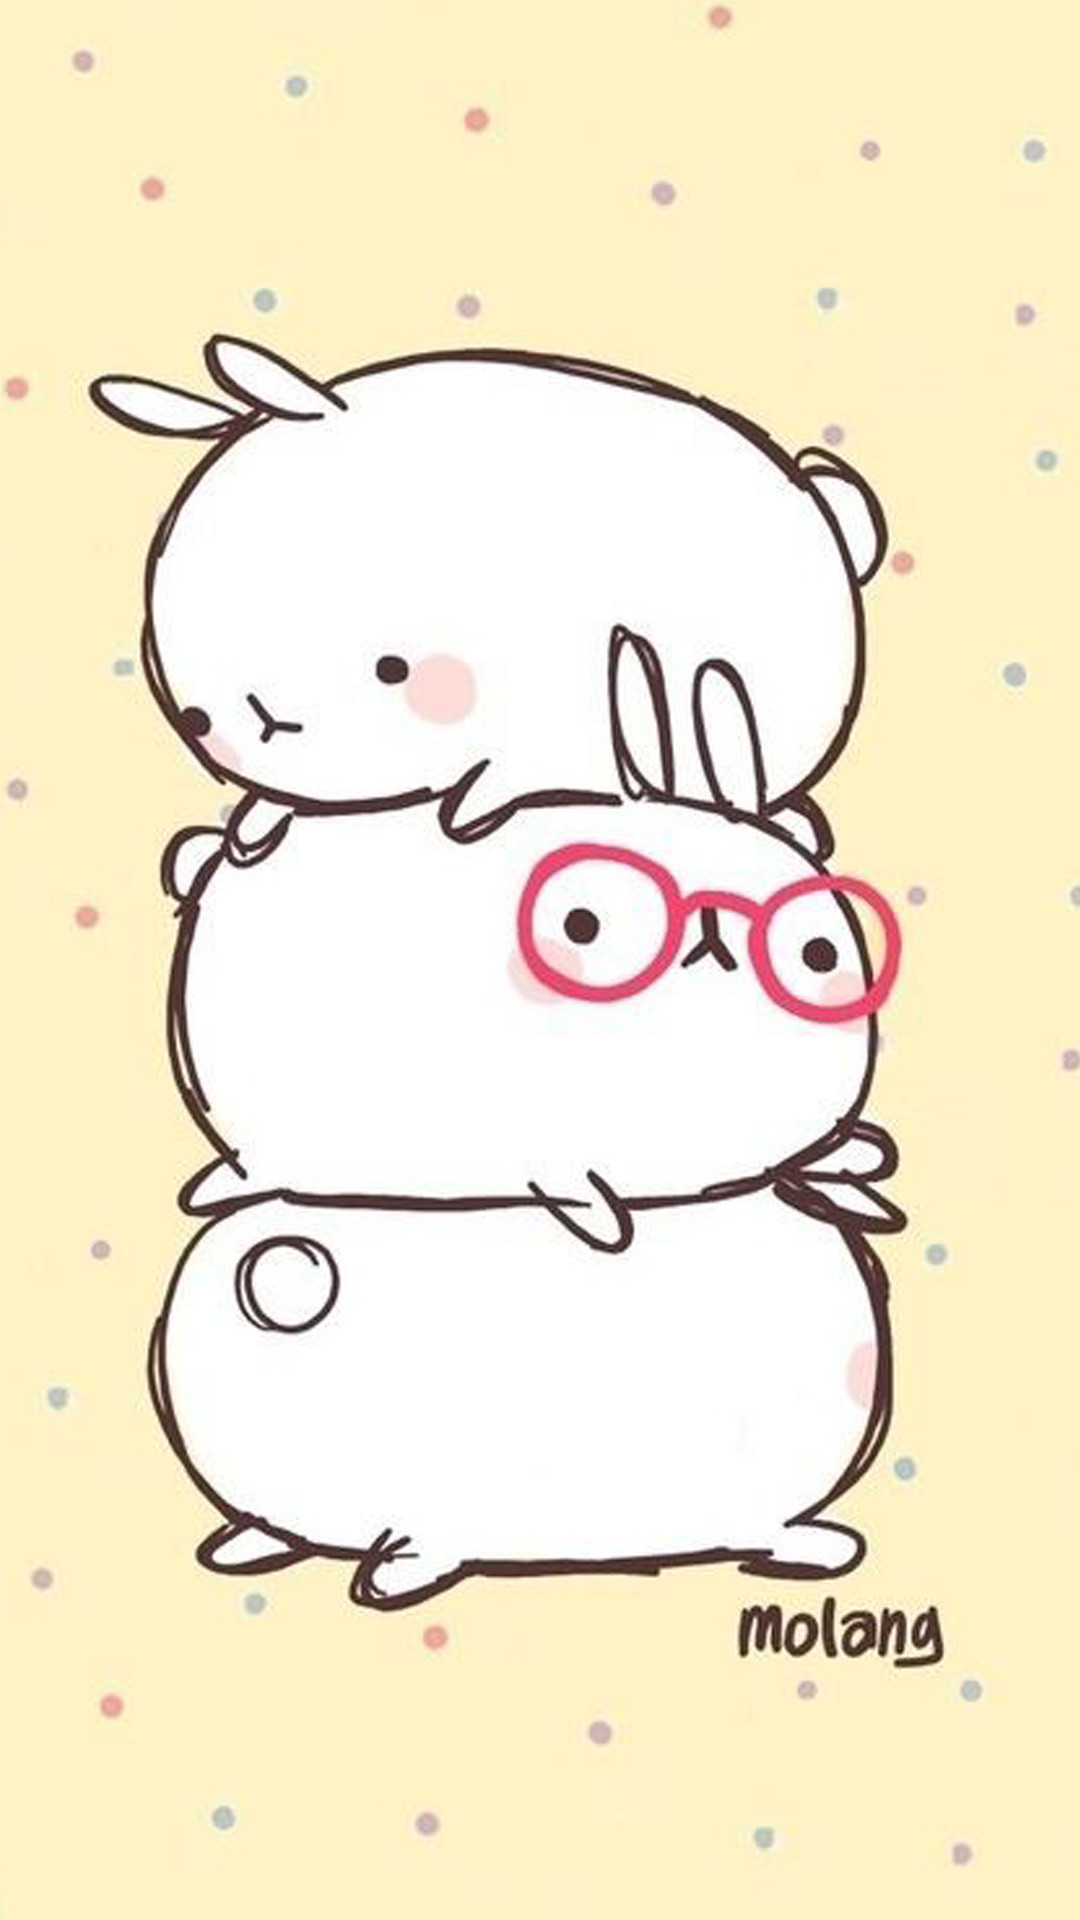 1080x1920 Desktop Cute Cartoon For Iphone Quality With Wallpaper Hd Of Computer